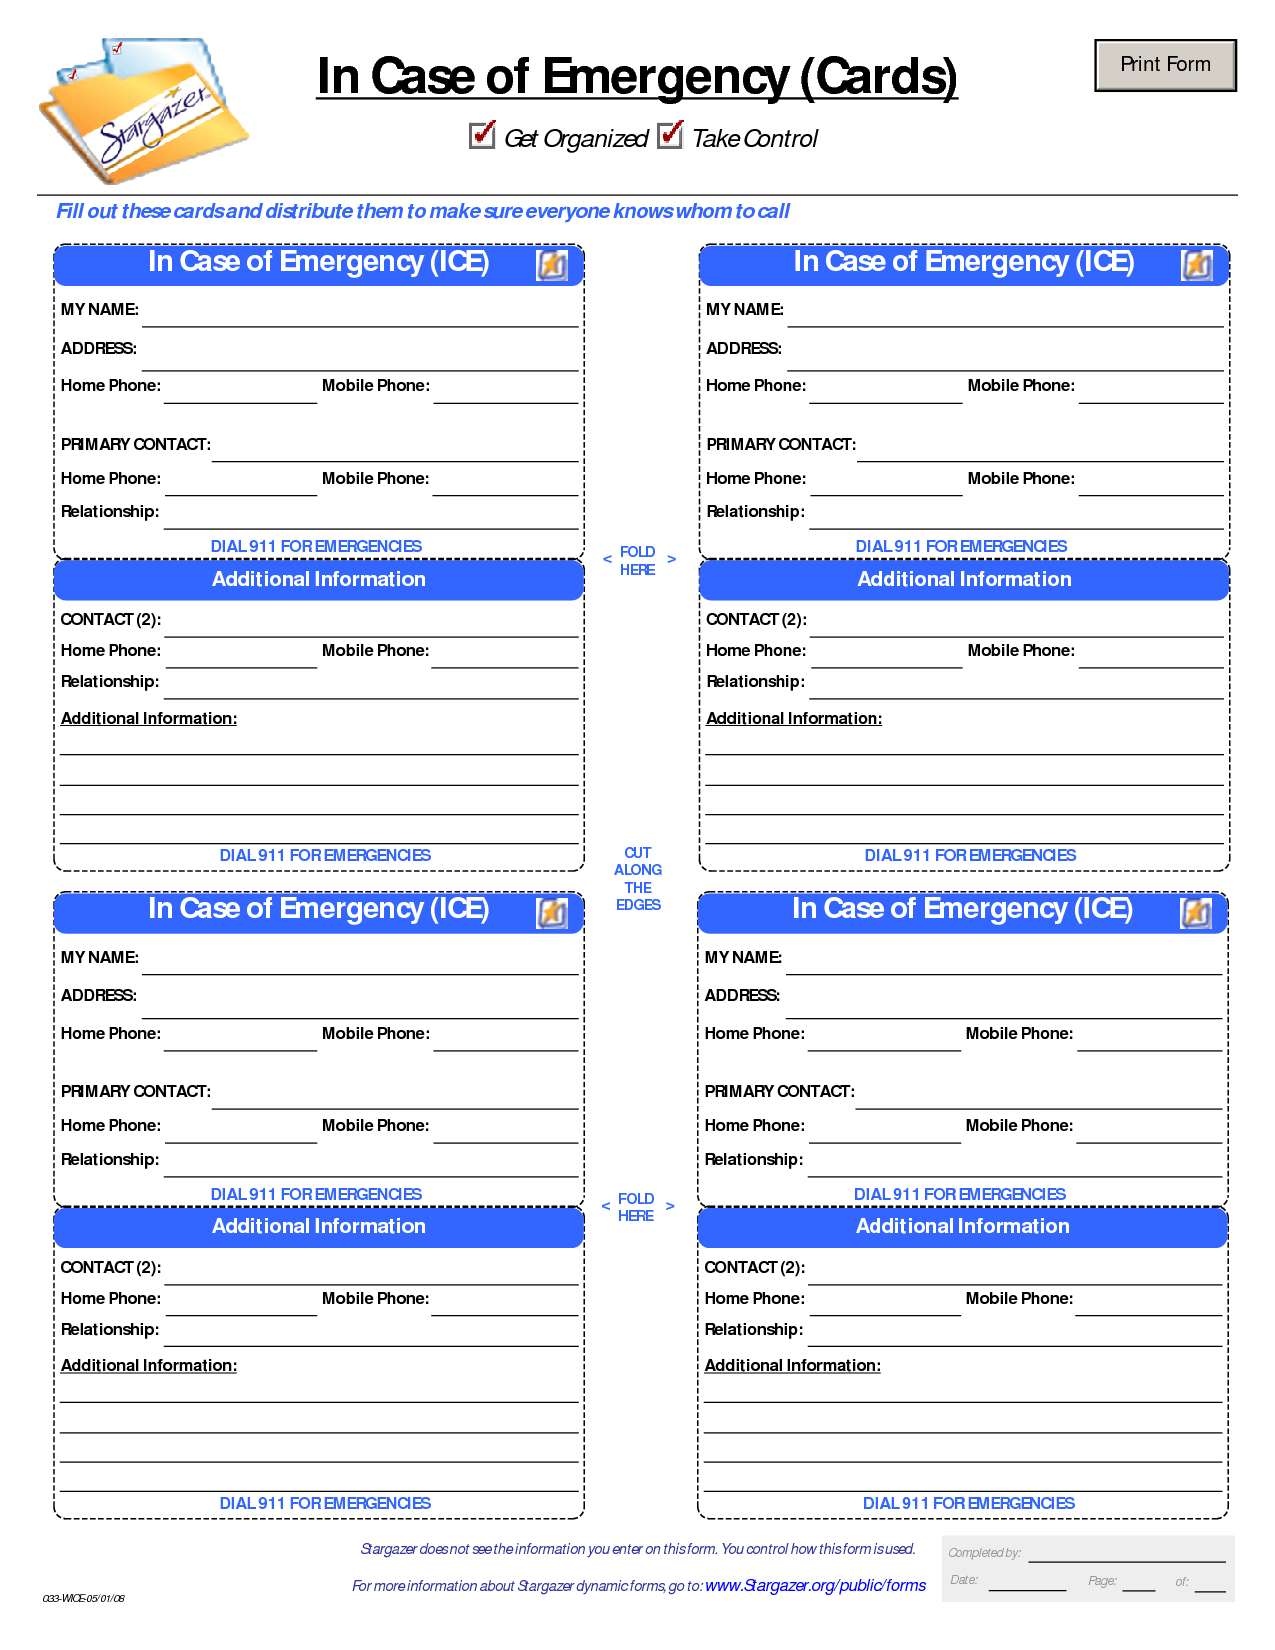 Id Card Template | In Case Of Emergency Cards | School | Id Intended For Id Card Template For Kids